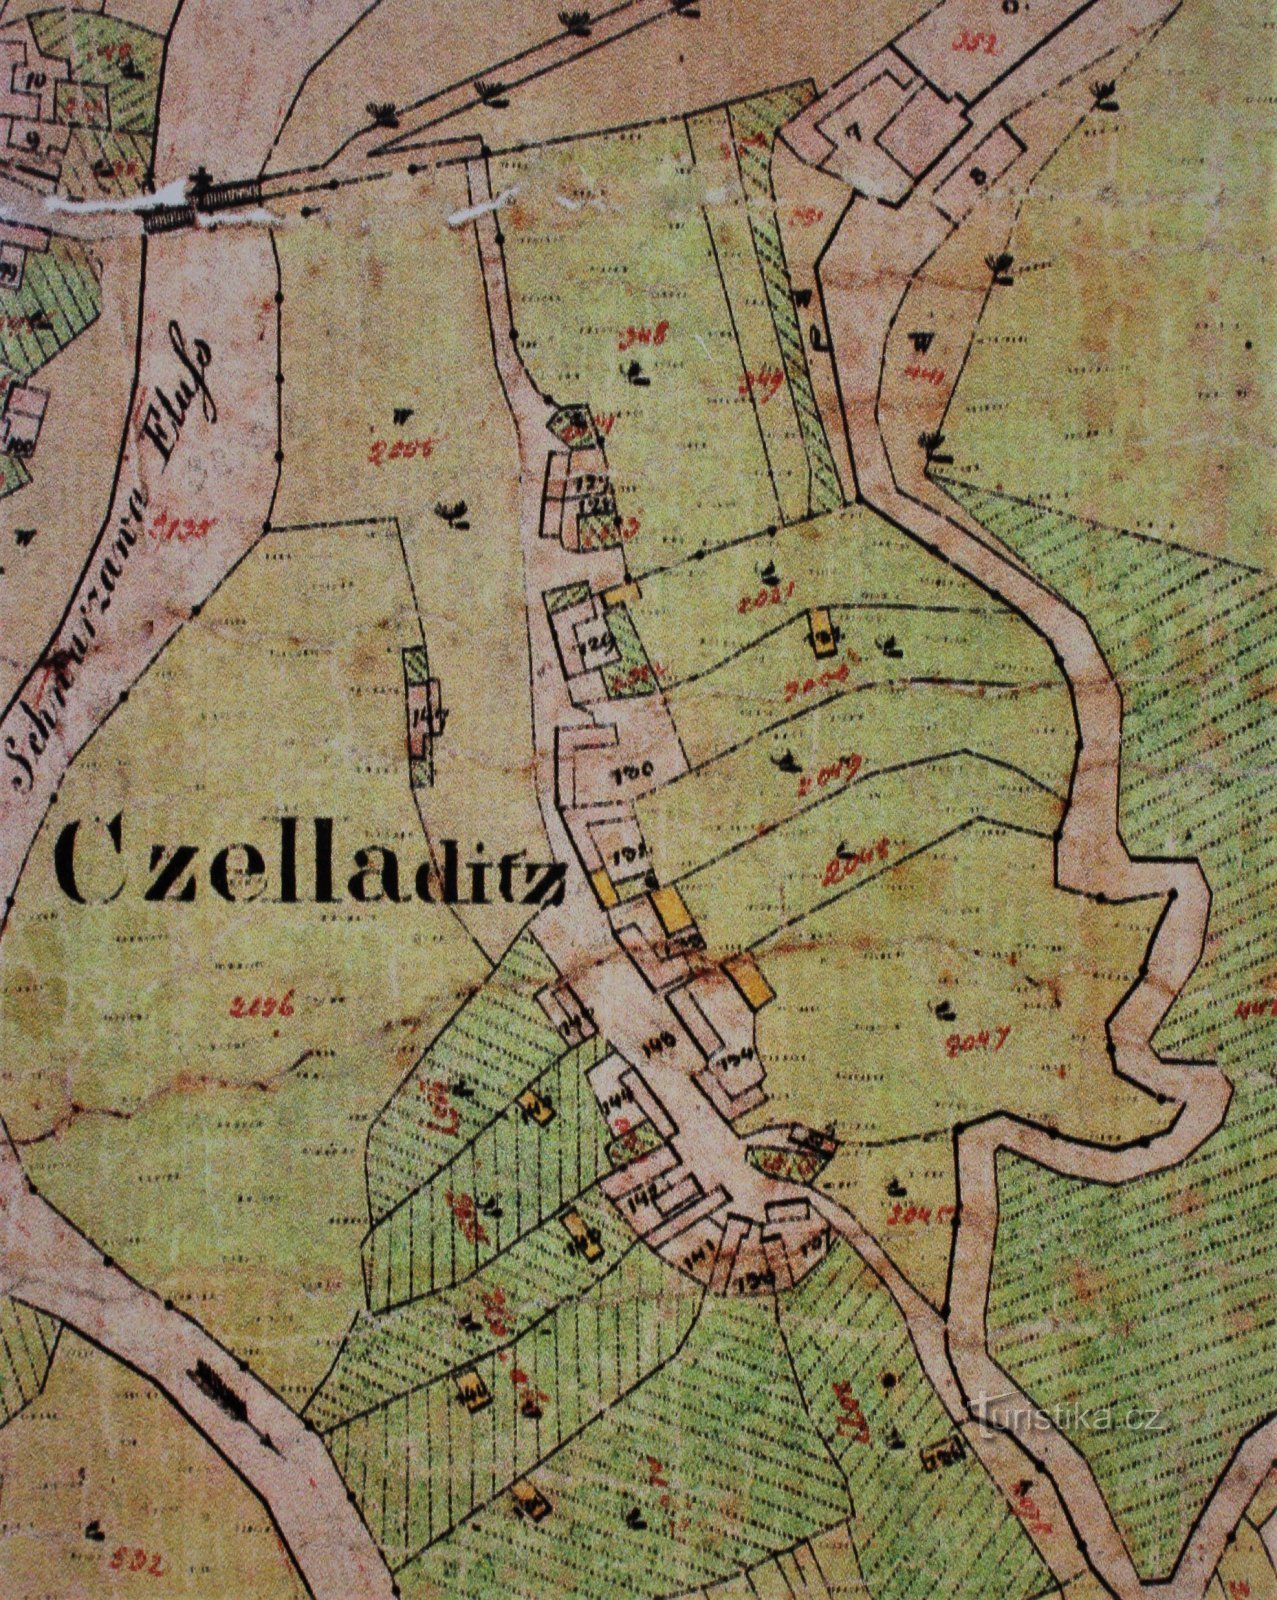 Map of Čeladice from 1825 (taken from the information board)